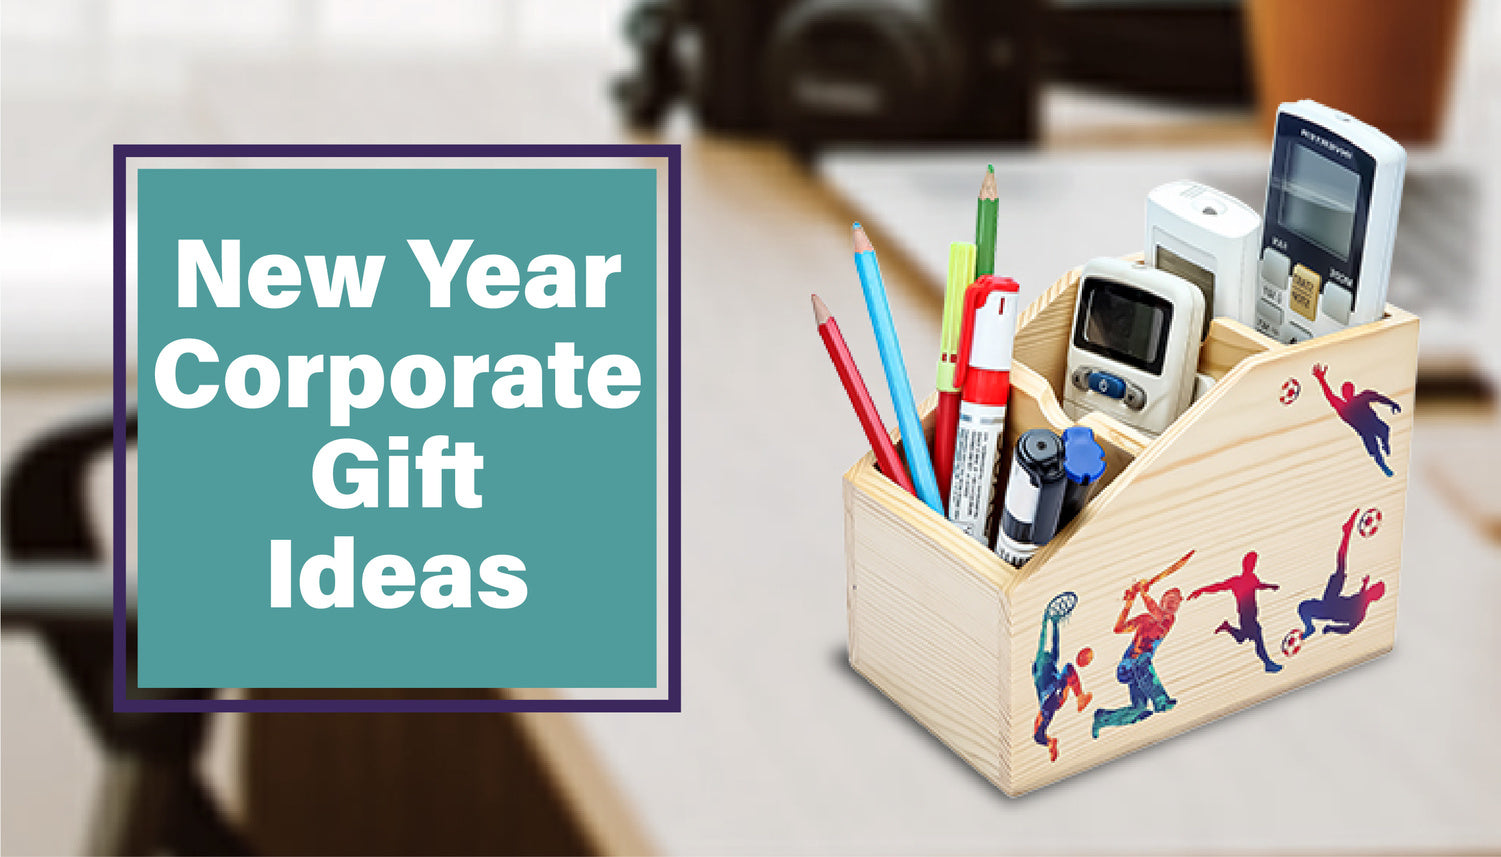 5 Client Gift Ideas Better Than Corporate Branded Items | Gifting Owl